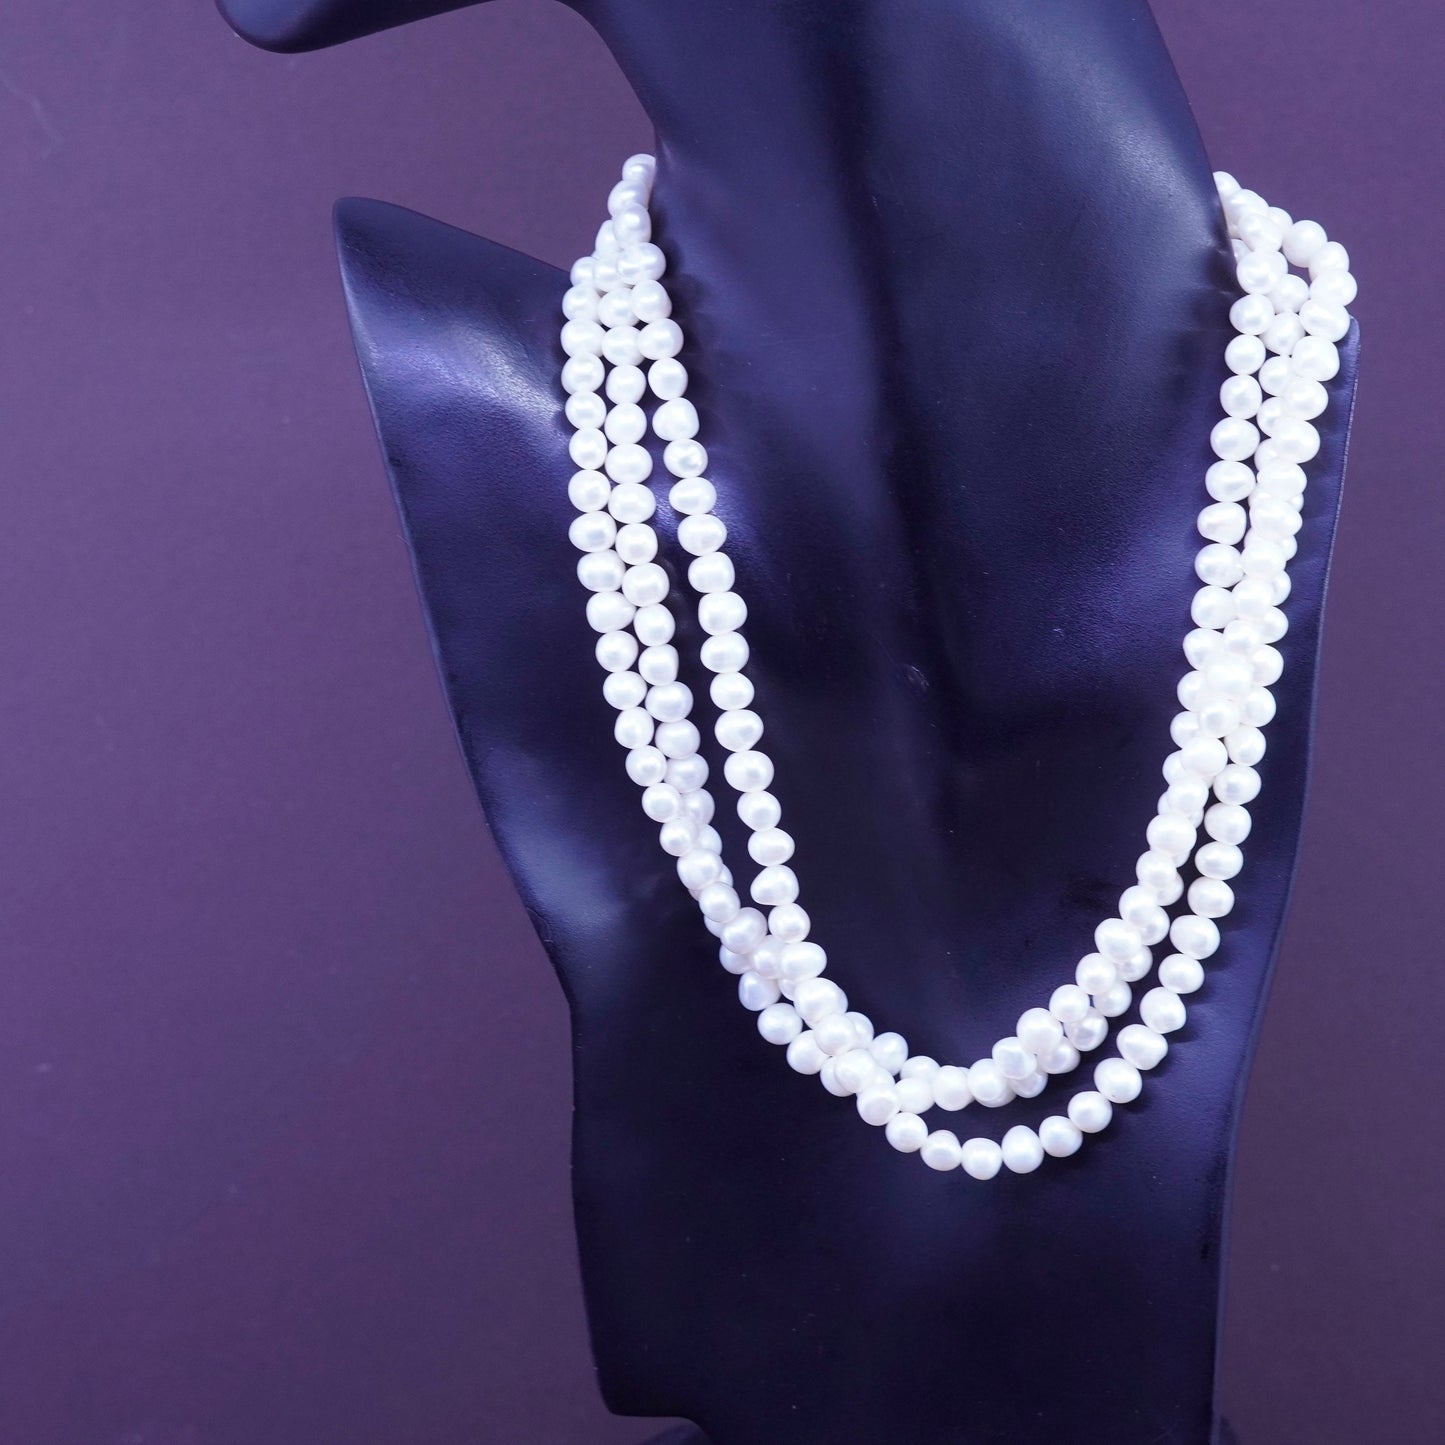 17+1”, triple strand pearl beads handmade necklace, Sterling 925 silver clasp